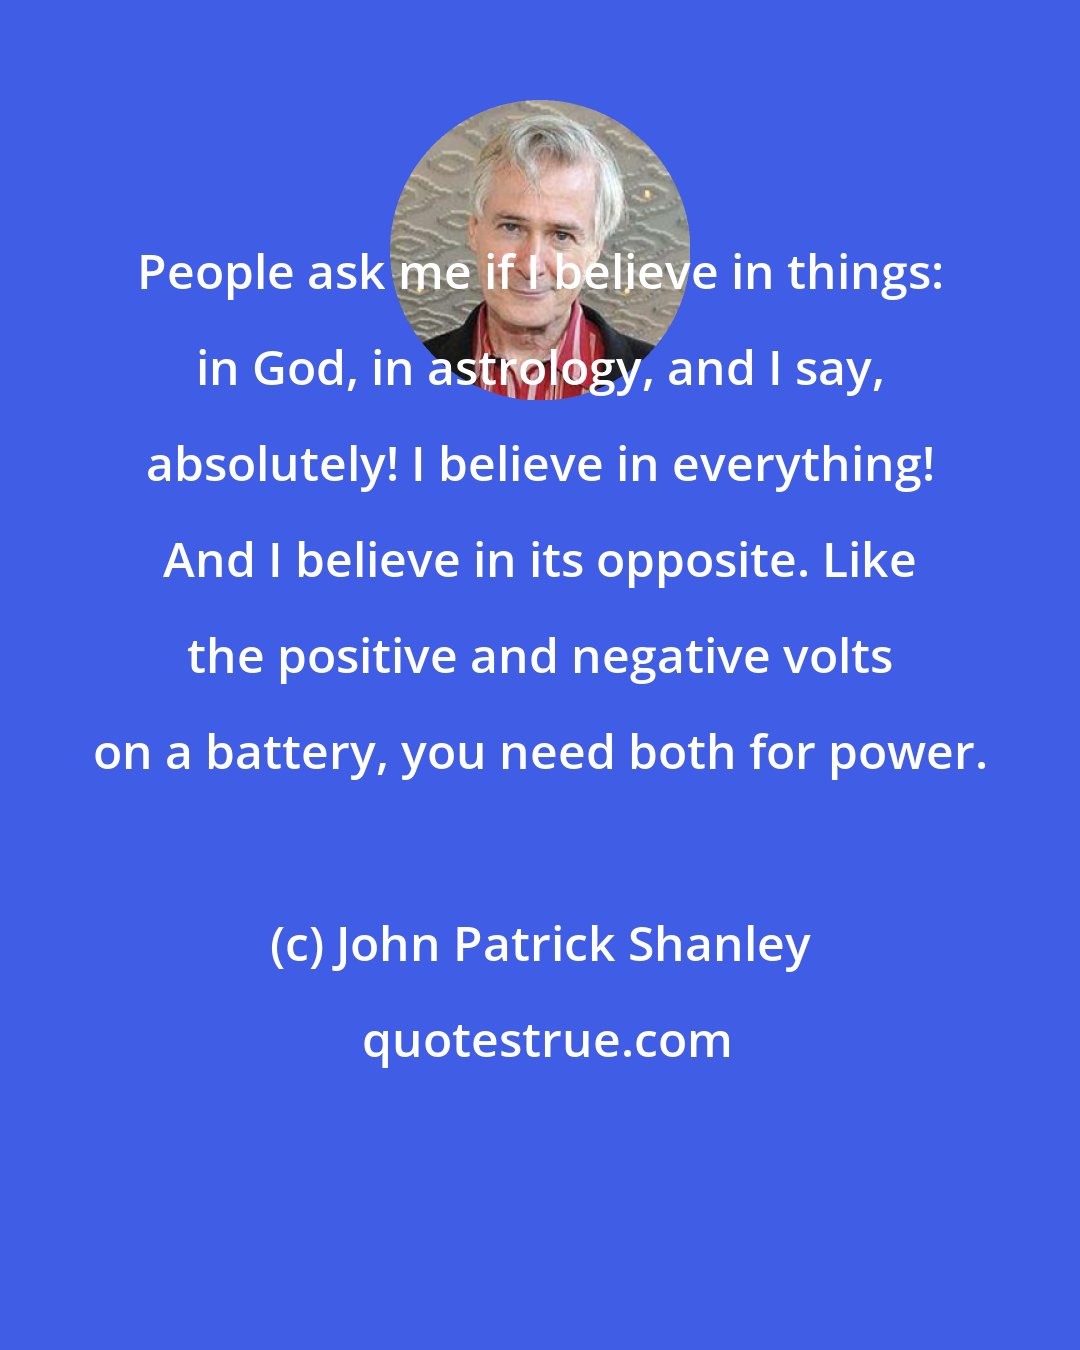 John Patrick Shanley: People ask me if I believe in things: in God, in astrology, and I say, absolutely! I believe in everything! And I believe in its opposite. Like the positive and negative volts on a battery, you need both for power.